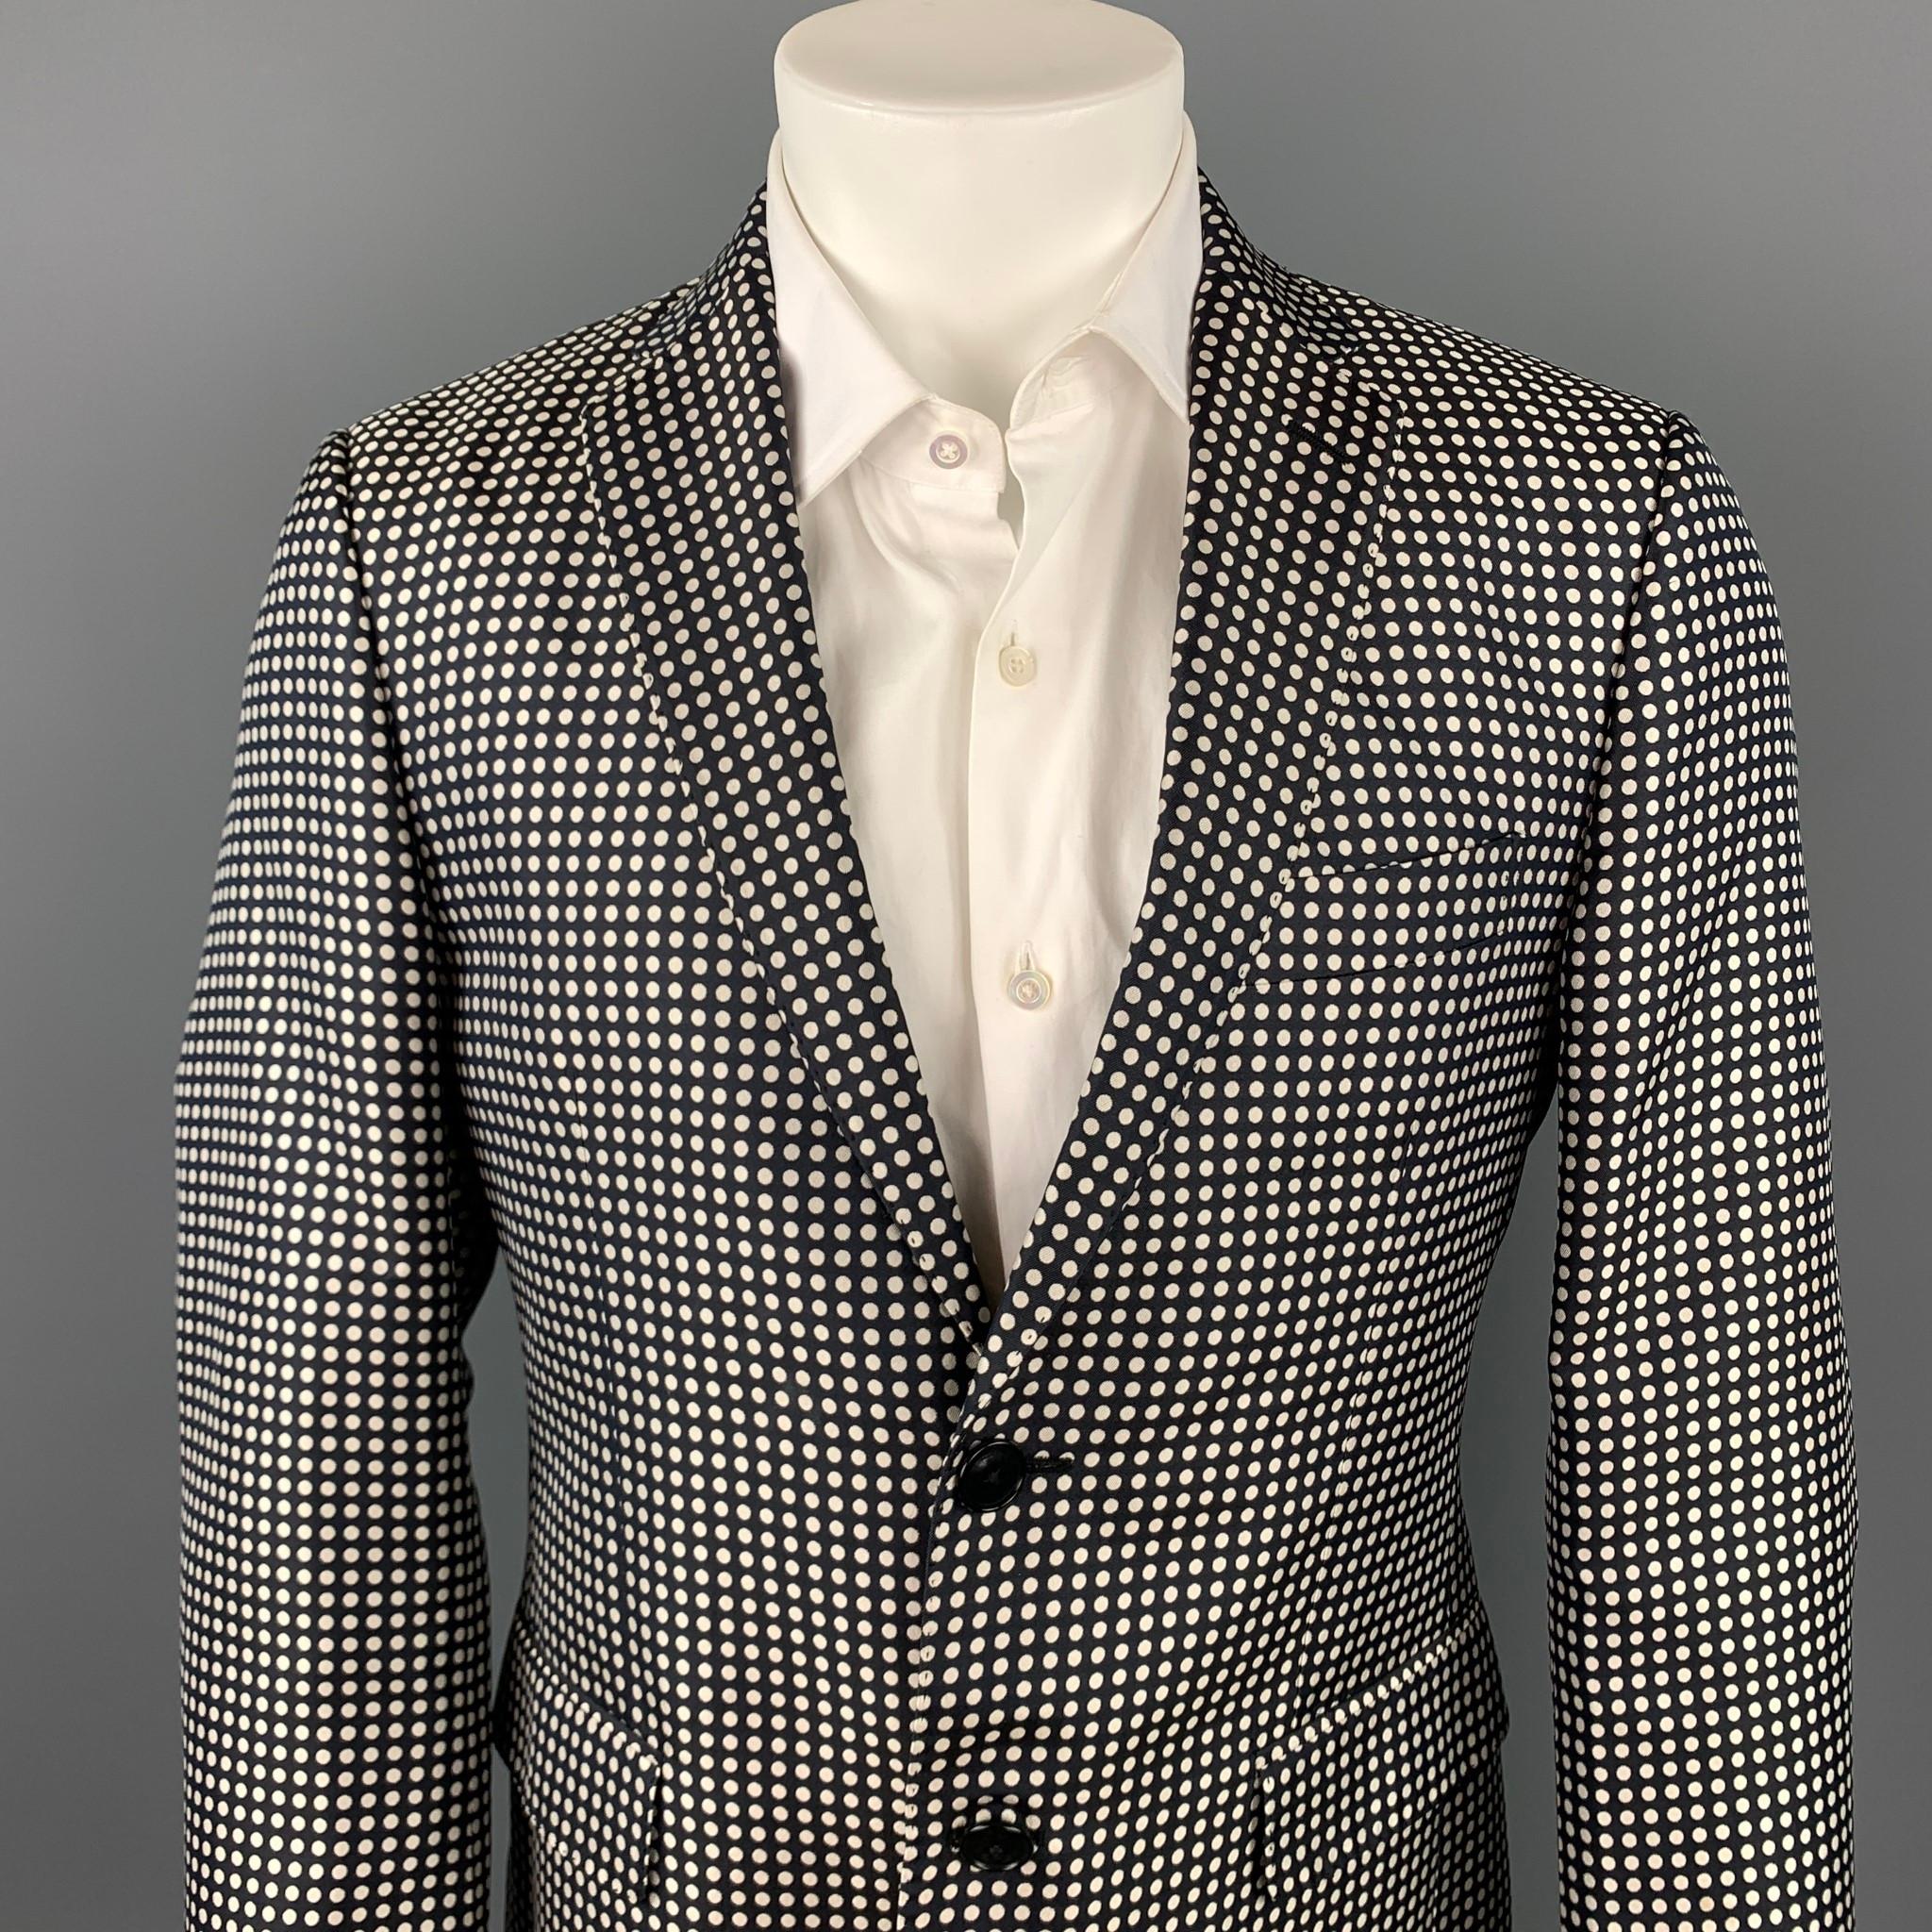 ETRO sport coat comes in a black & white polka dot silk with a full liner featuring a notch lapel, flap pockets, and a two button closure. Made in Italy.

Very Good Pre-Owned Condition.
Marked: IT 48

Measurements:

Shoulder: 17.5 in.
Chest: 38